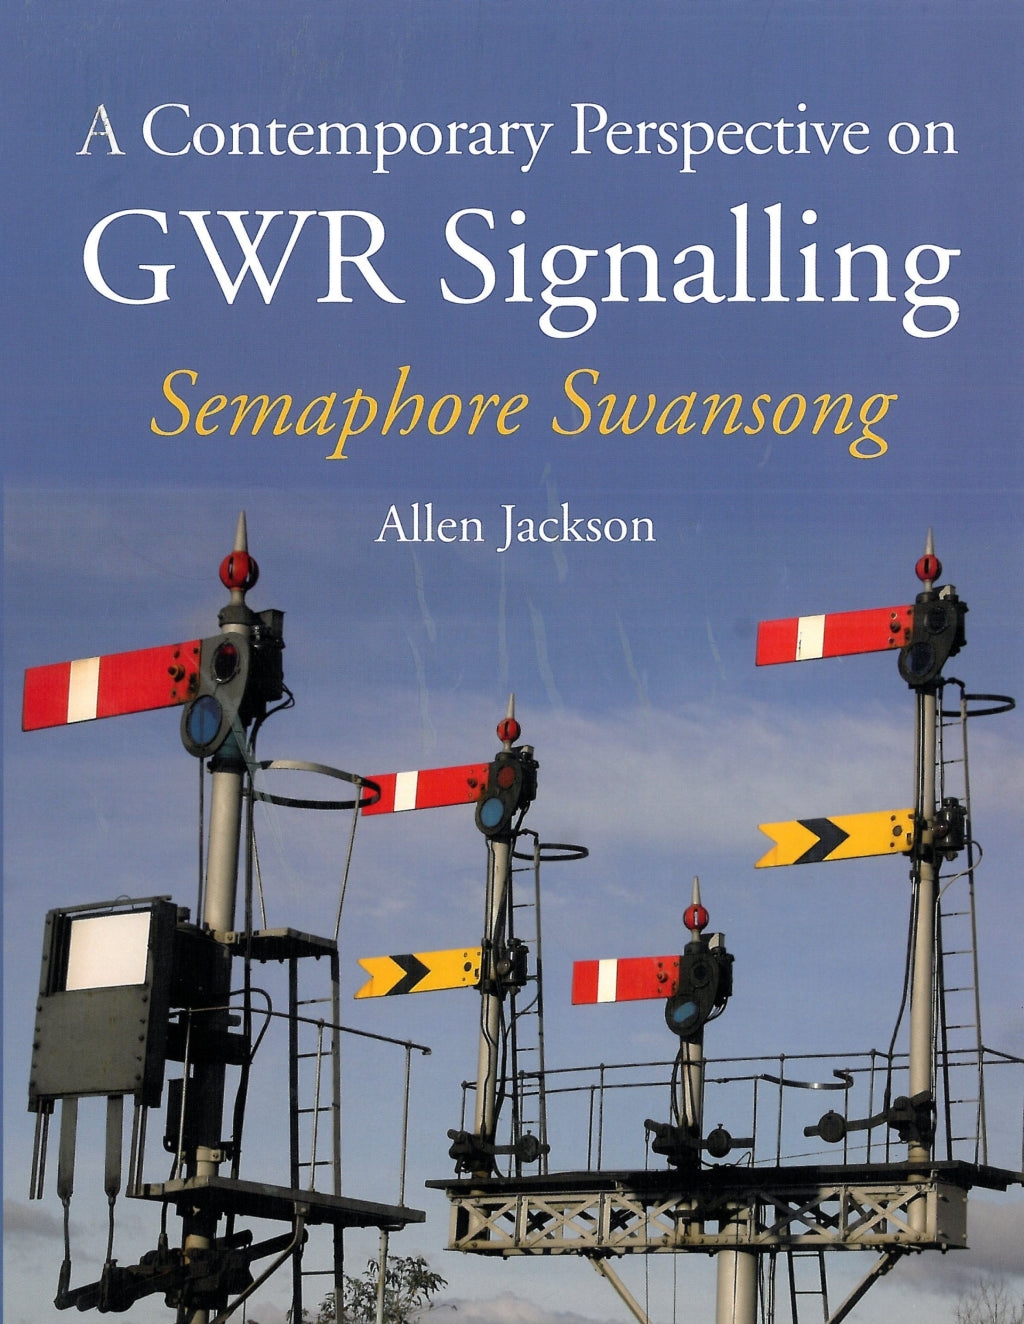 A Contemporary Perspective on GWR Signalling